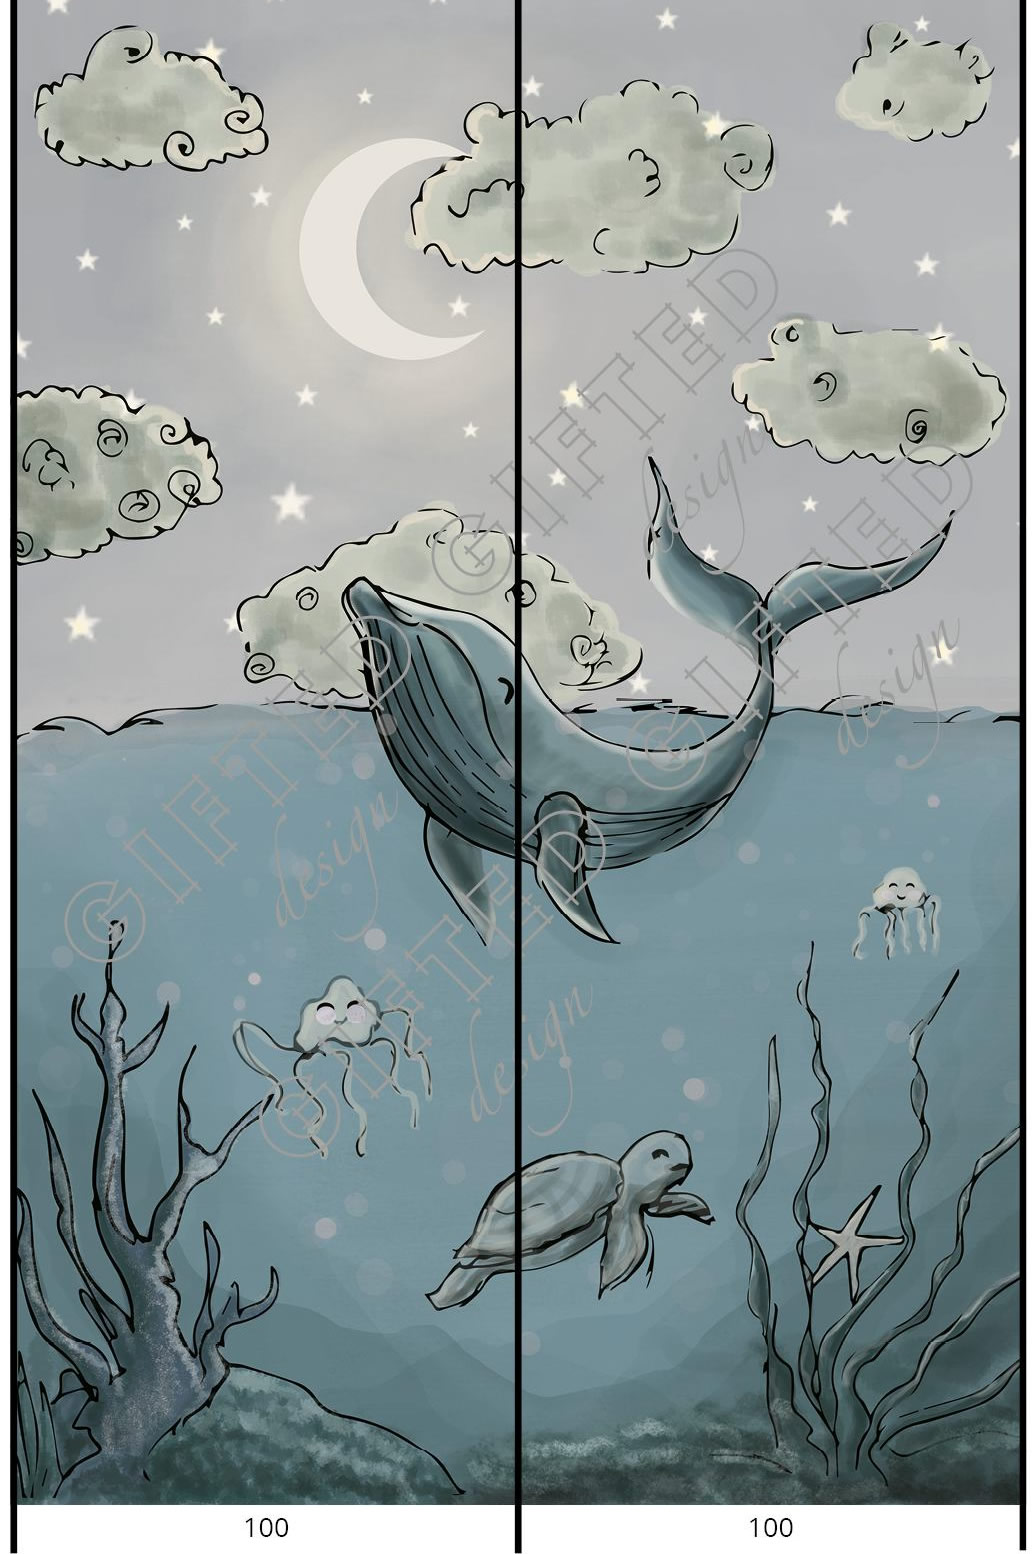 Whale and the night